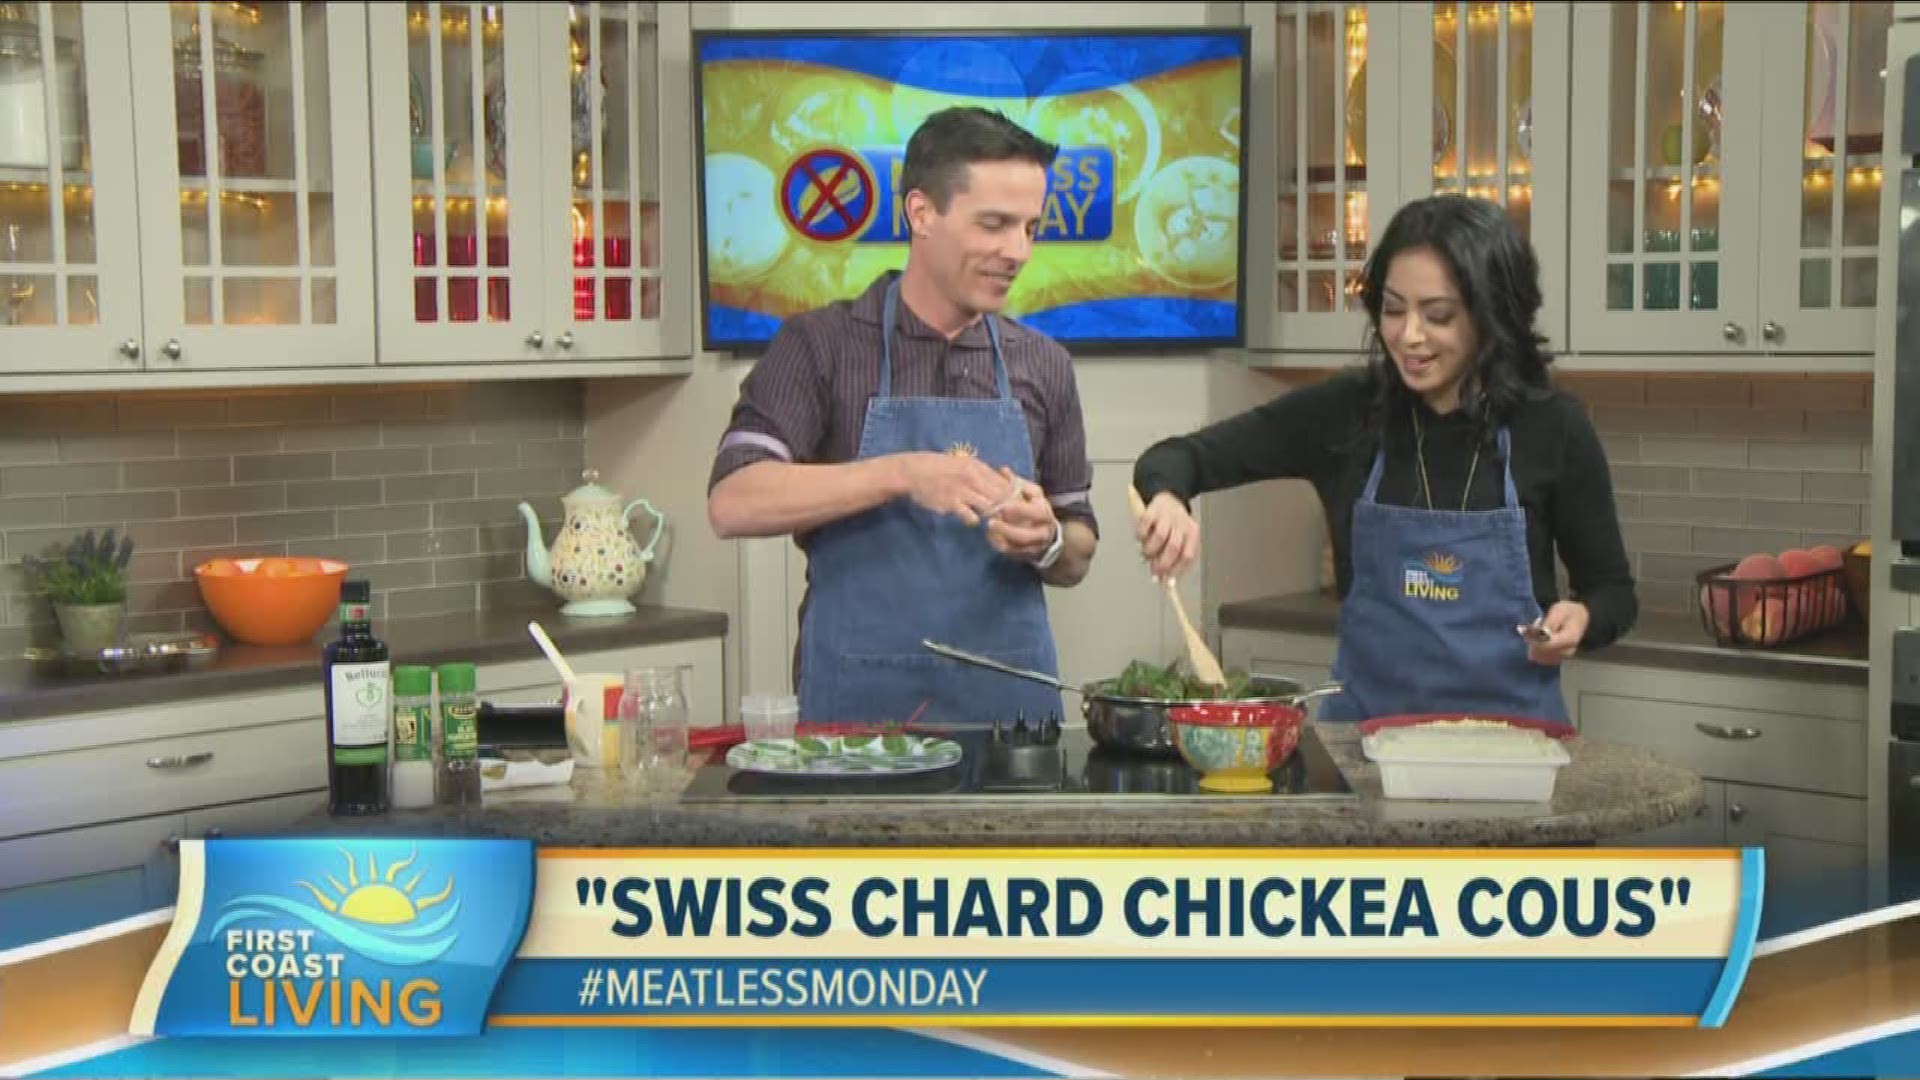 Curtis Dvorak and Haddie Djemal whip up another dish for Meatless Monday that'll you love.